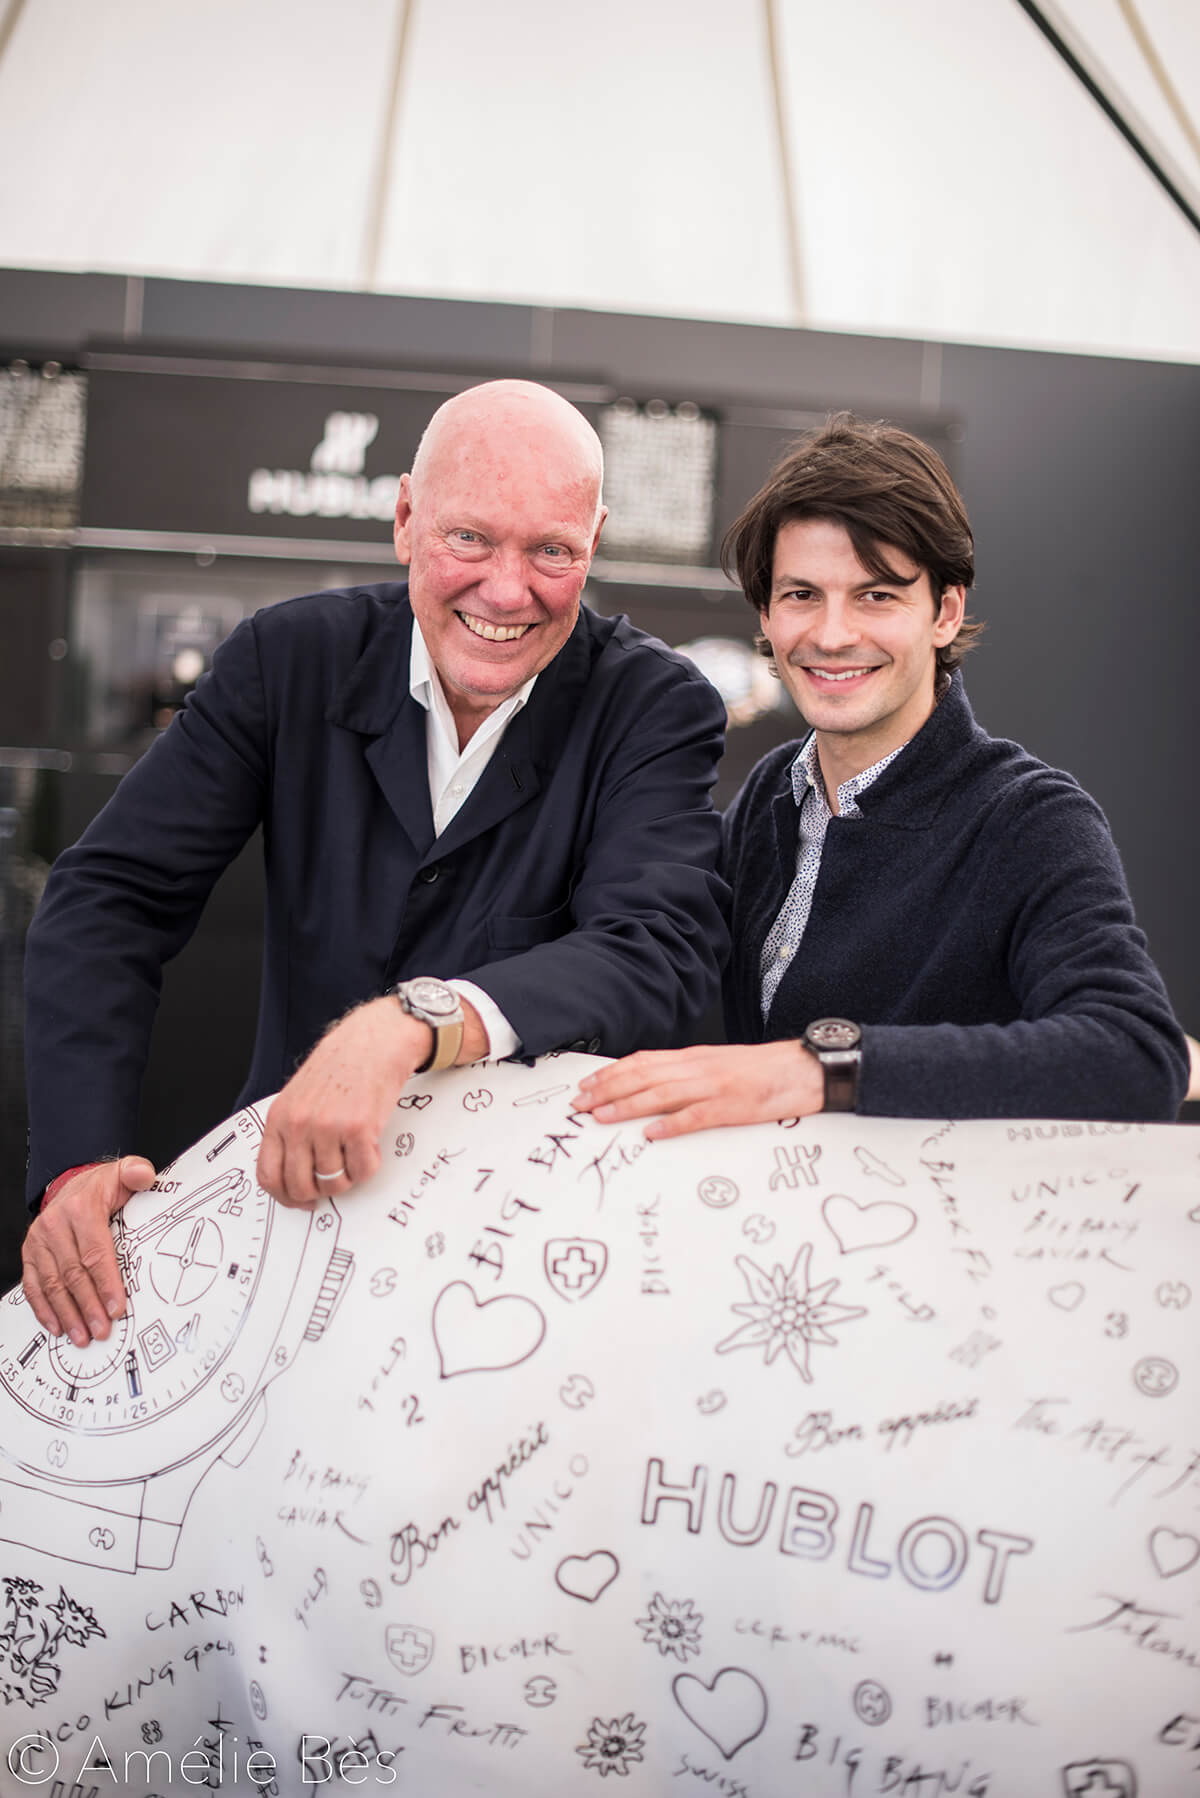 Jean-Claude Biver: 'Luxury is decorating everything